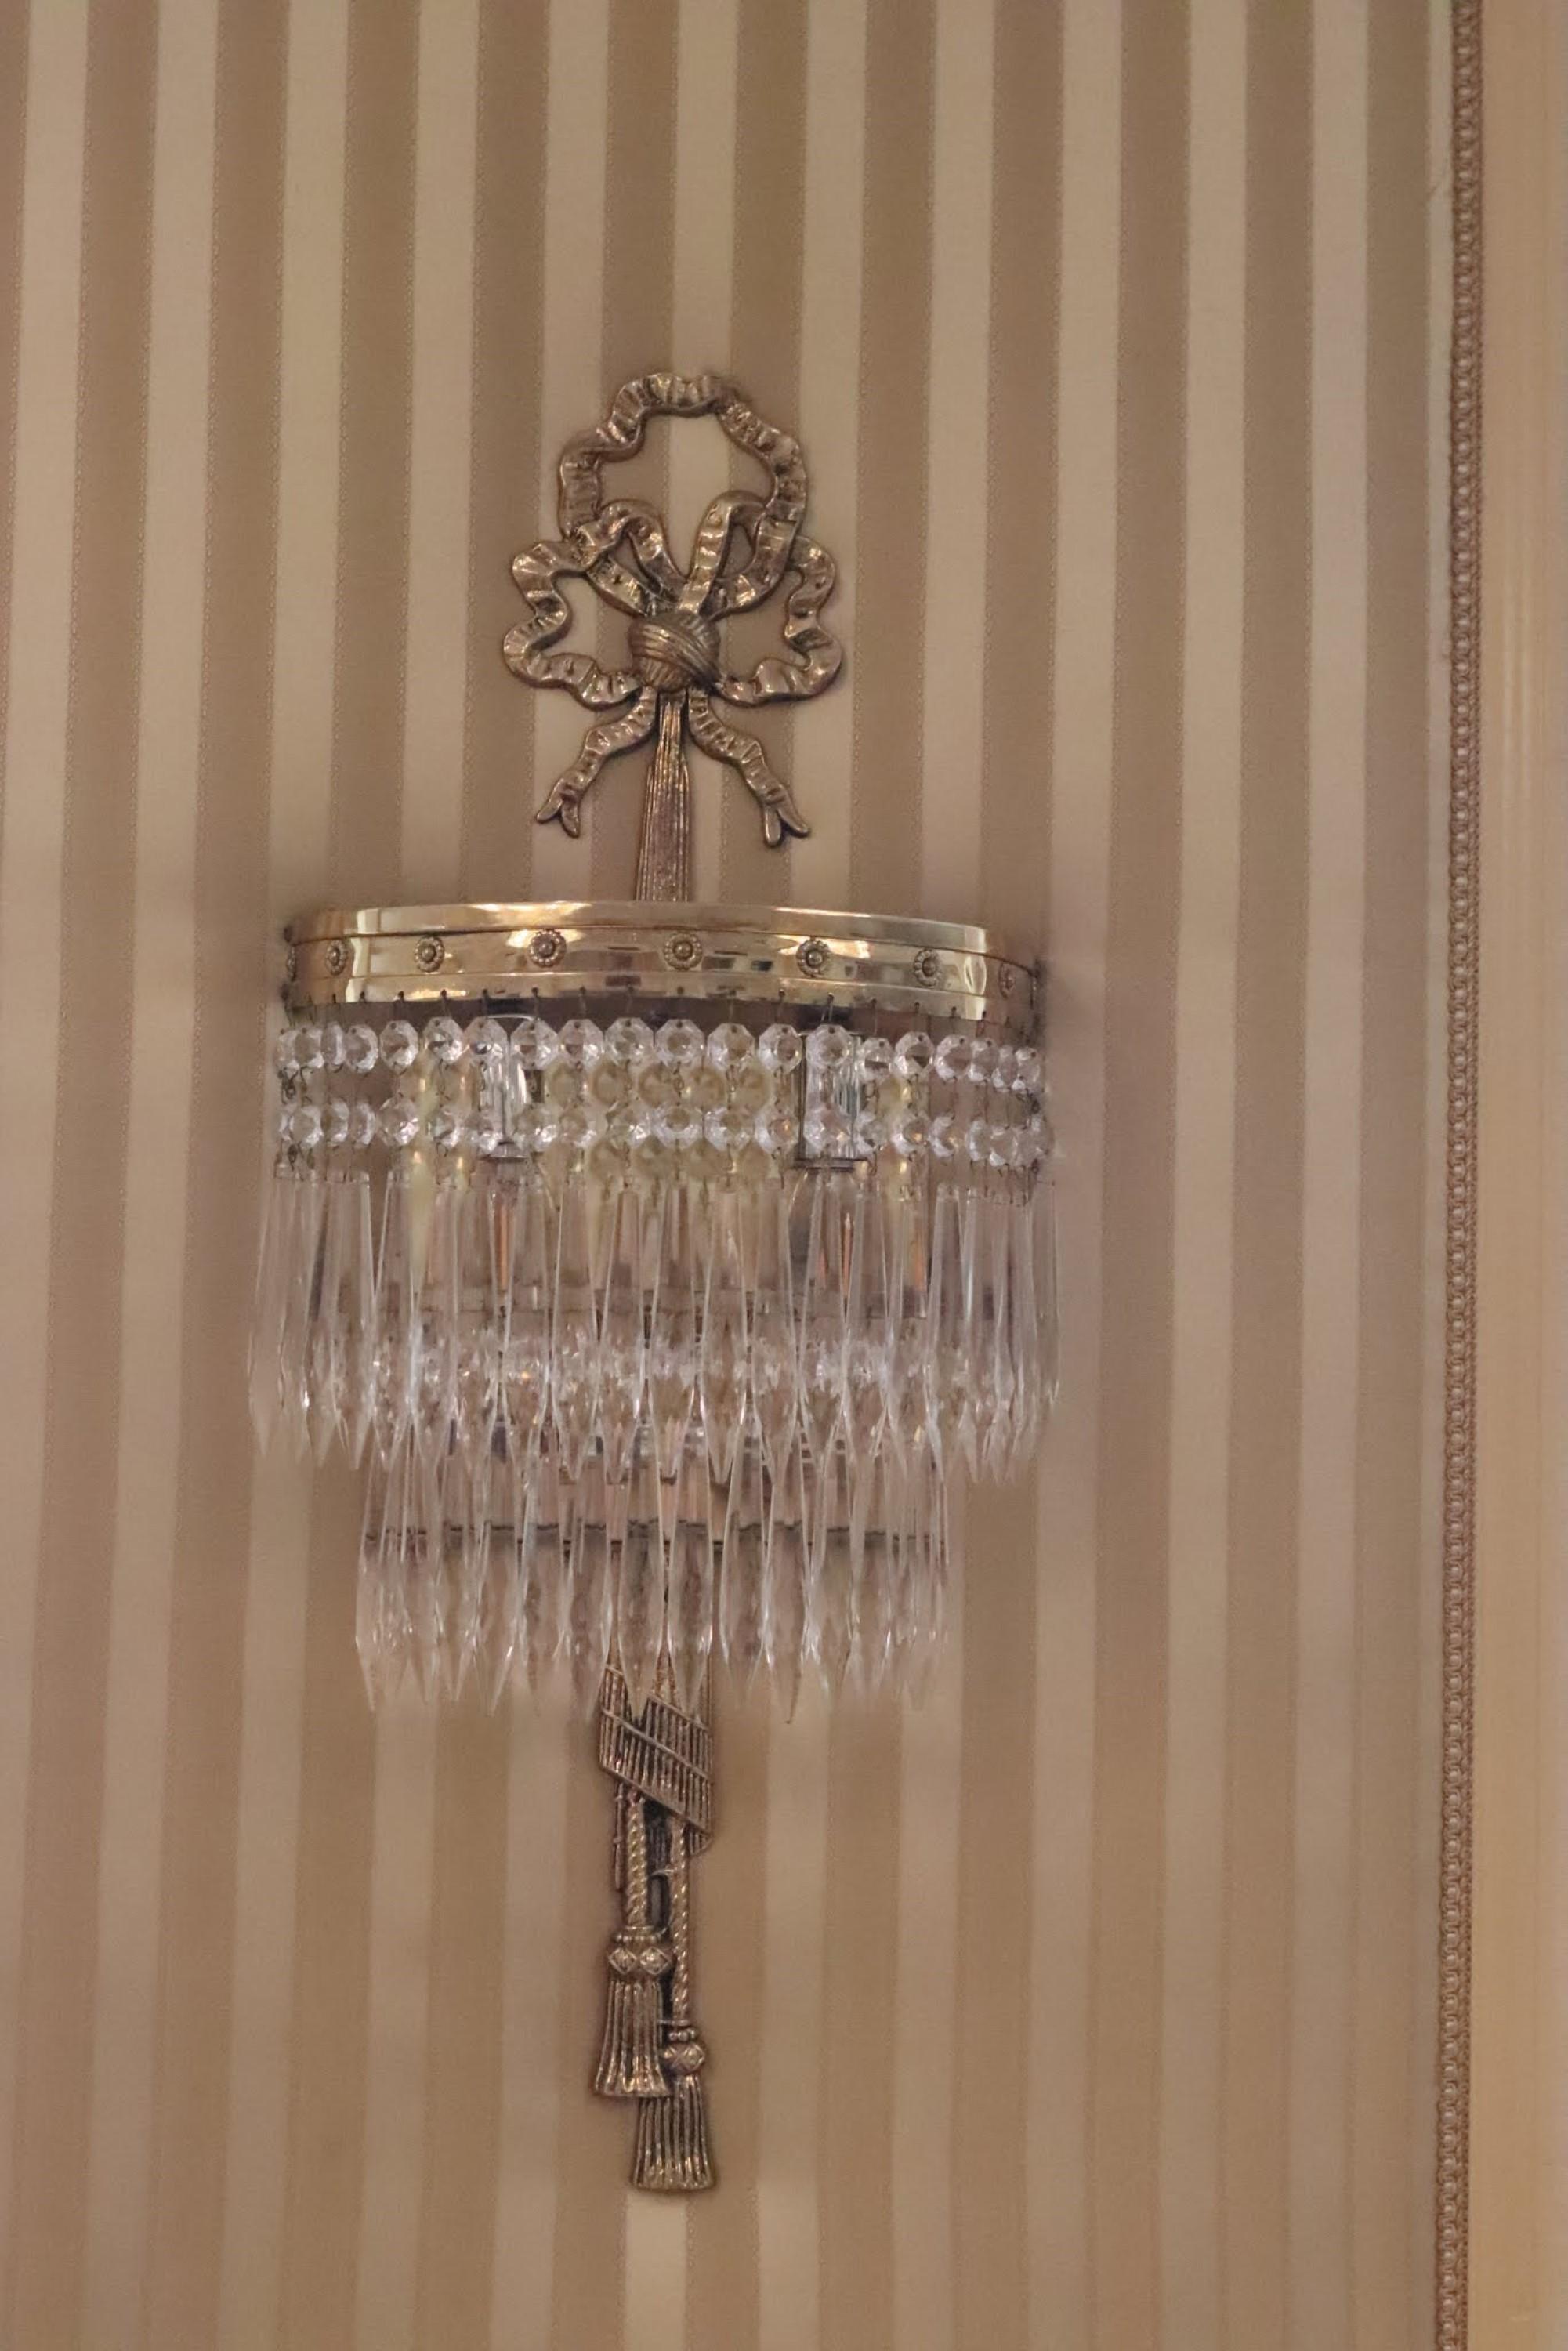 NYC Waldorf Astoria Hotel Pair Brass Crystal Wall Sconces Park Ave Suite South 4